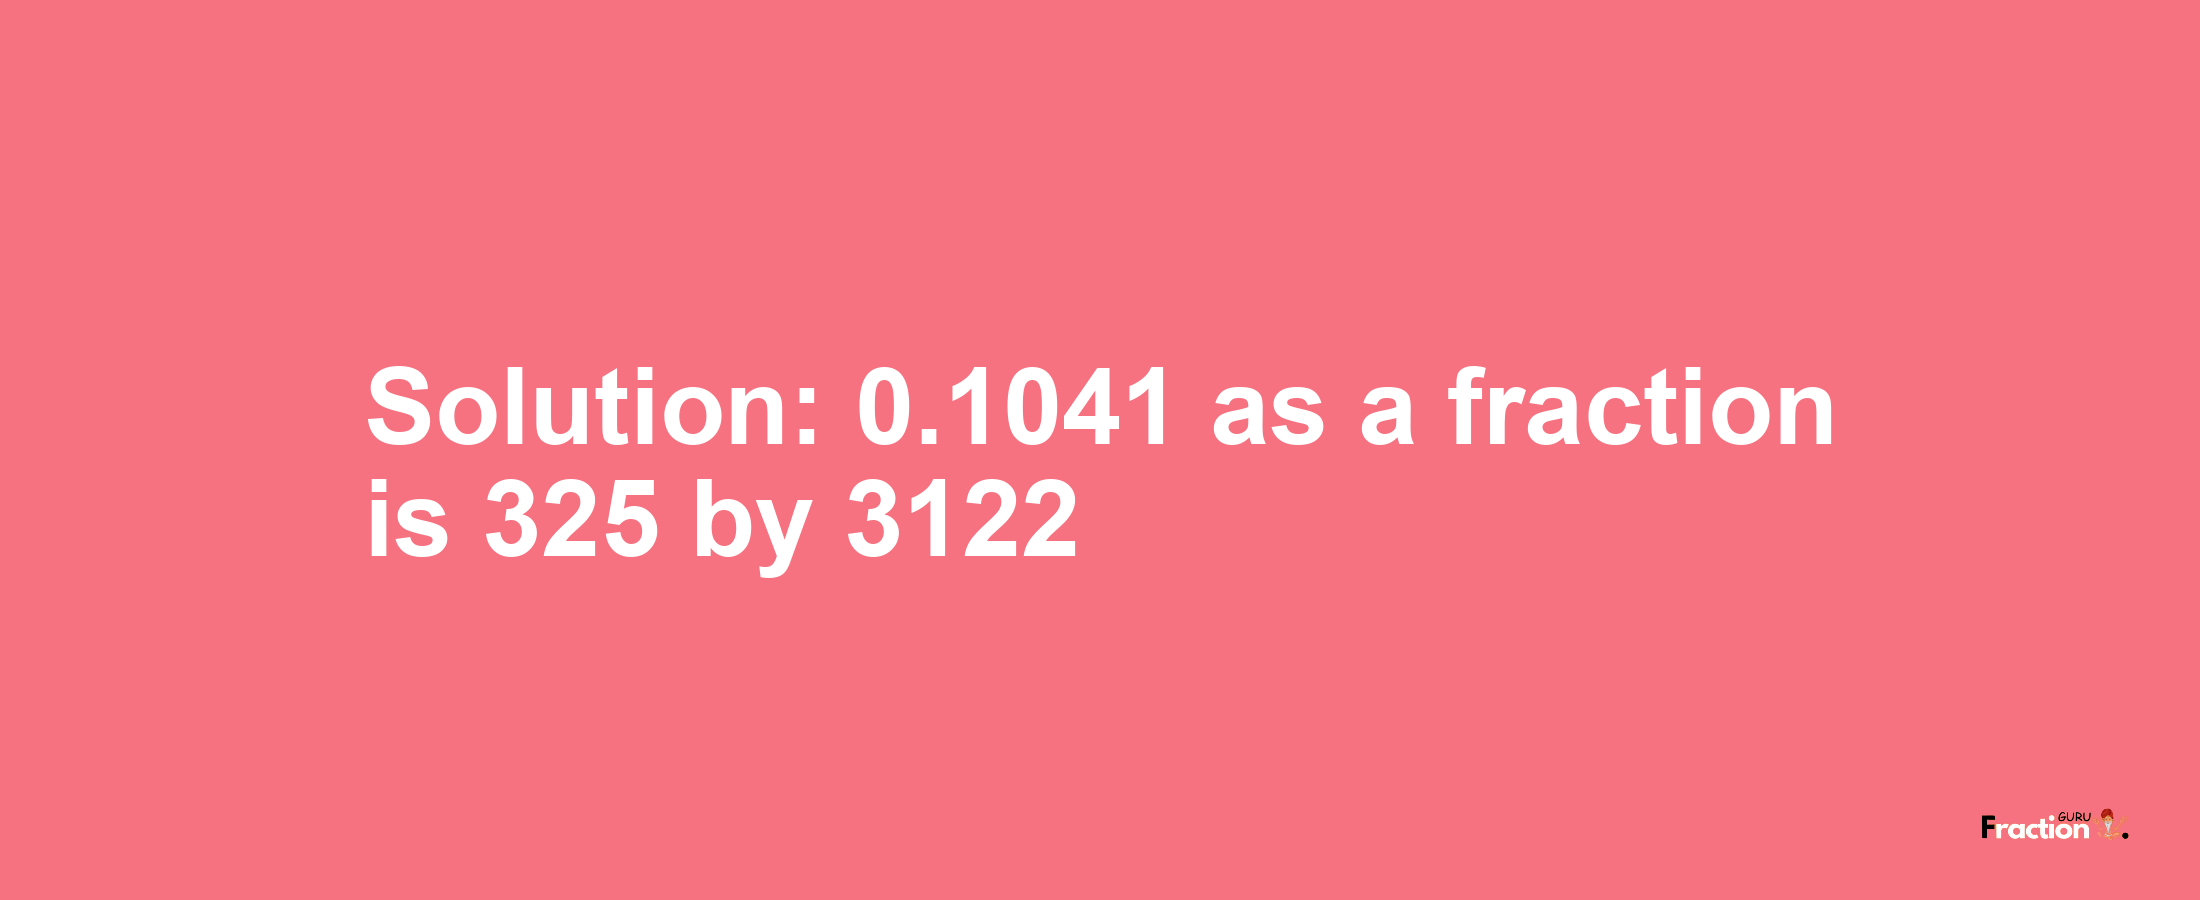 Solution:0.1041 as a fraction is 325/3122